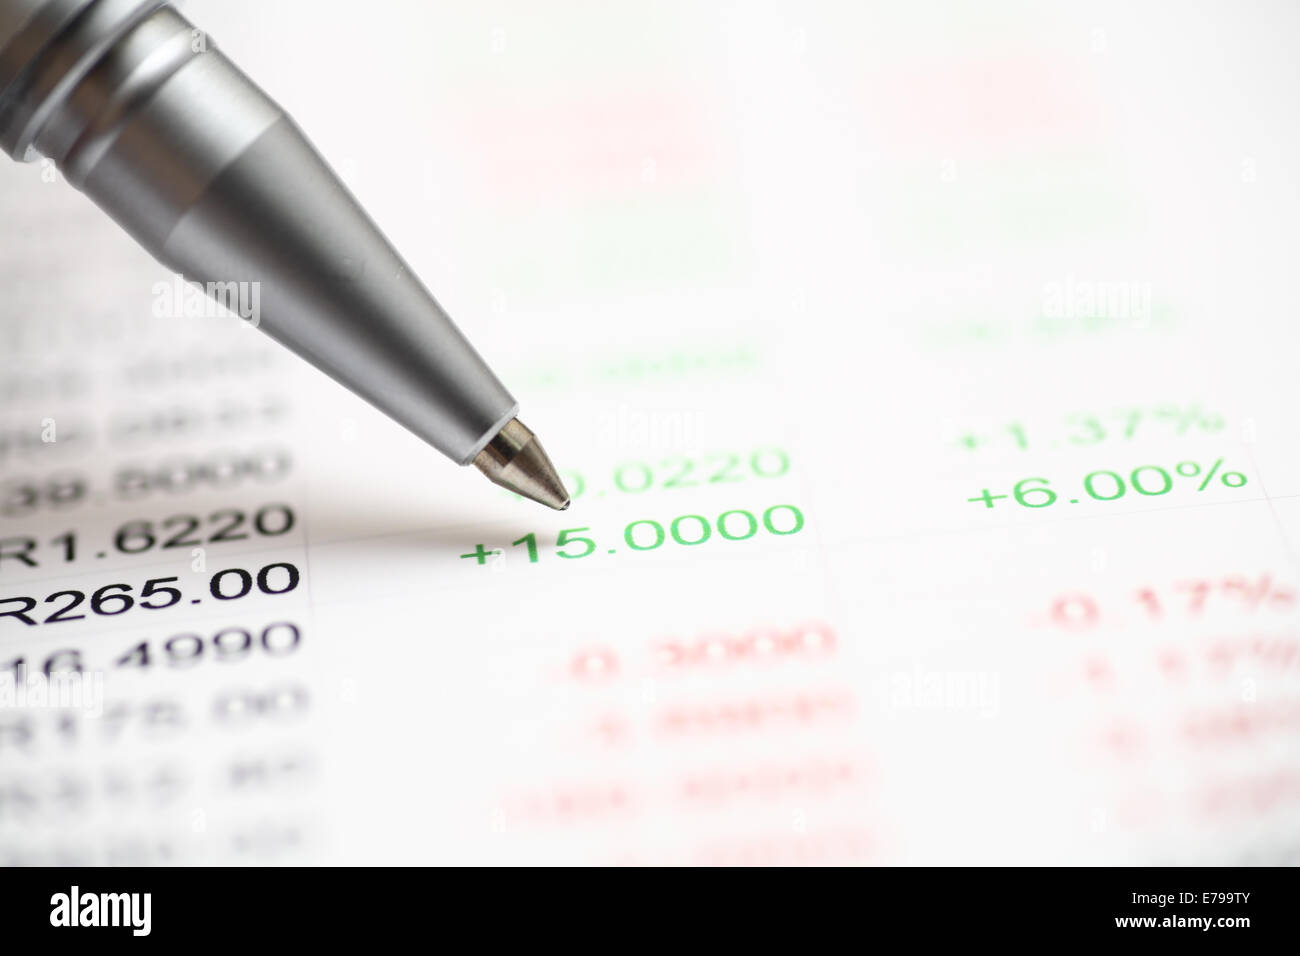 Analysis of financial statements. Focus on pen. Shallow depth of field. Close-up. Stock Photo